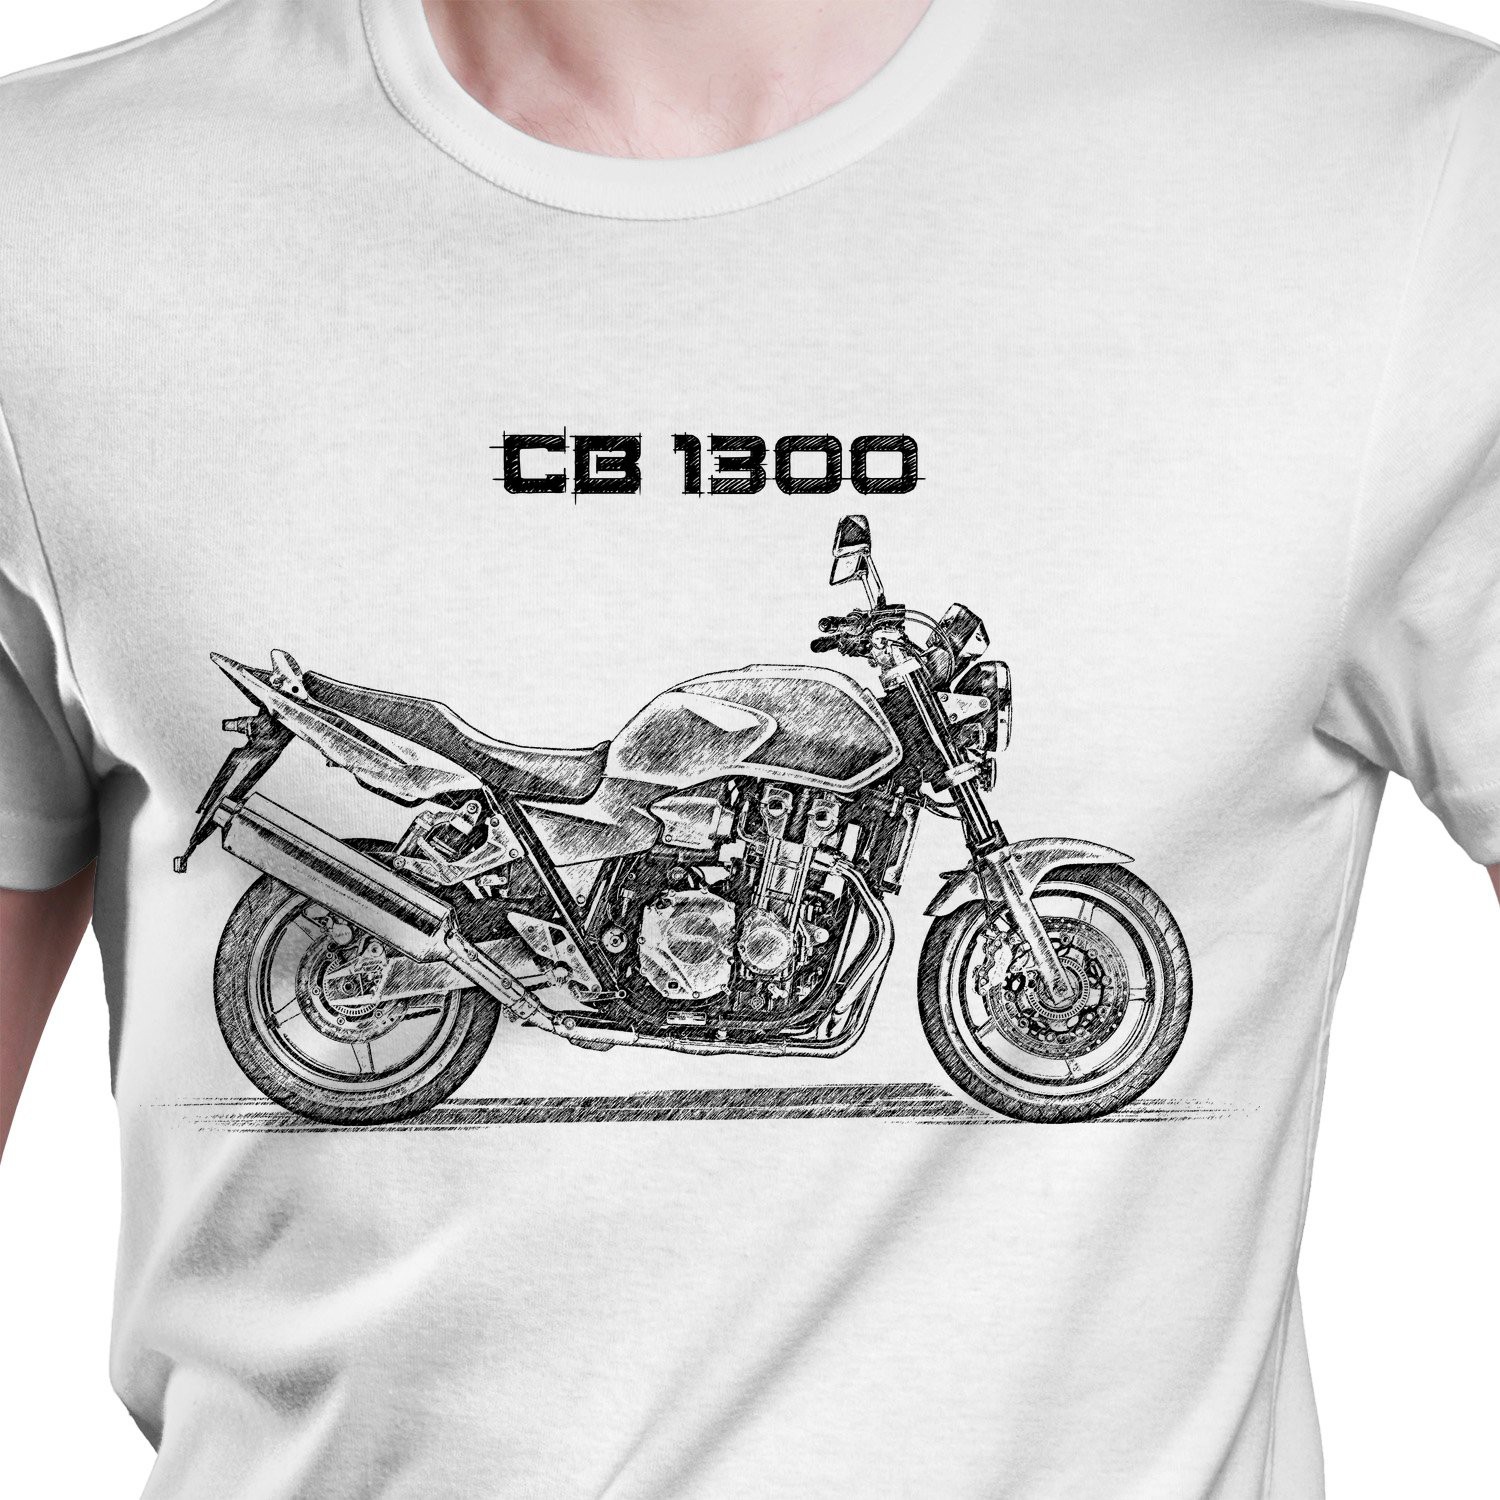 White T-shirt with Honda CB 1300. Gift for motorcyclist.